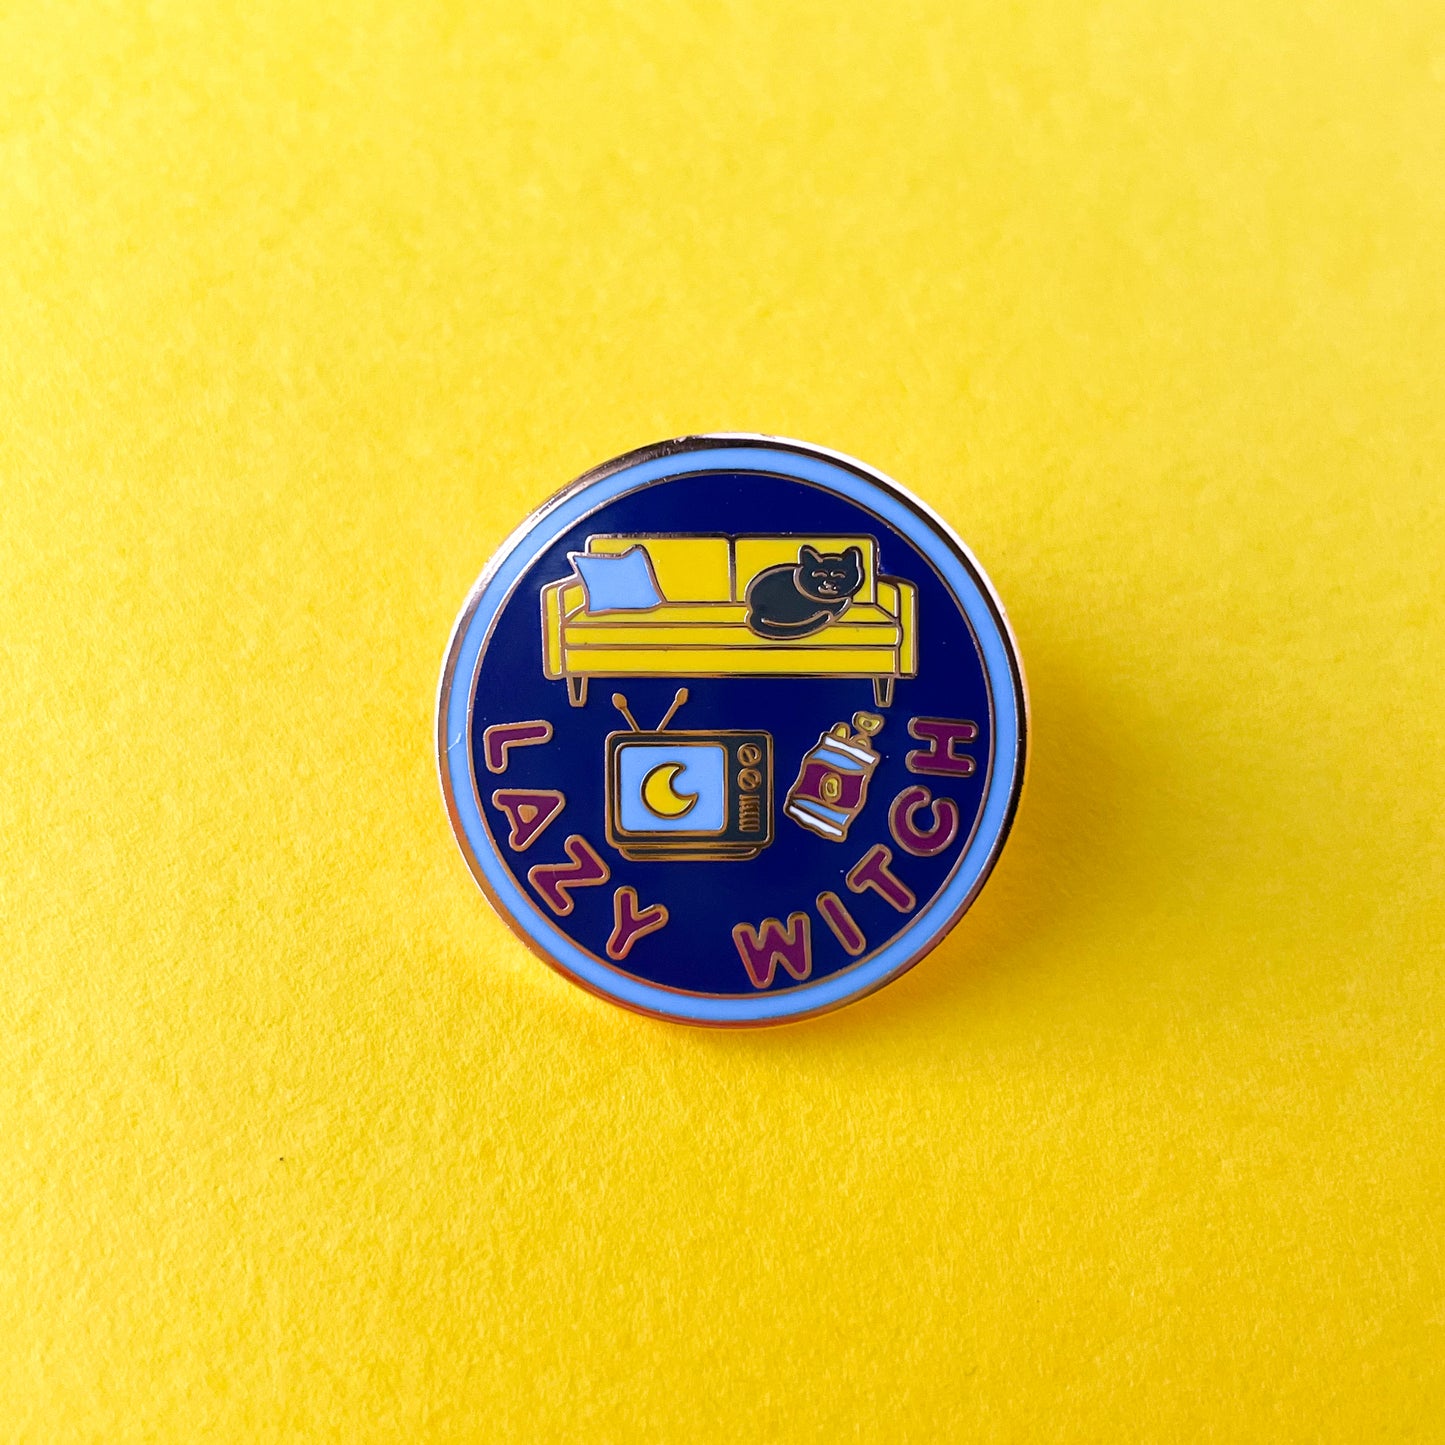 A circular enamel pin on a yellow background. The pin has the words "Lazy Witch" on it. 